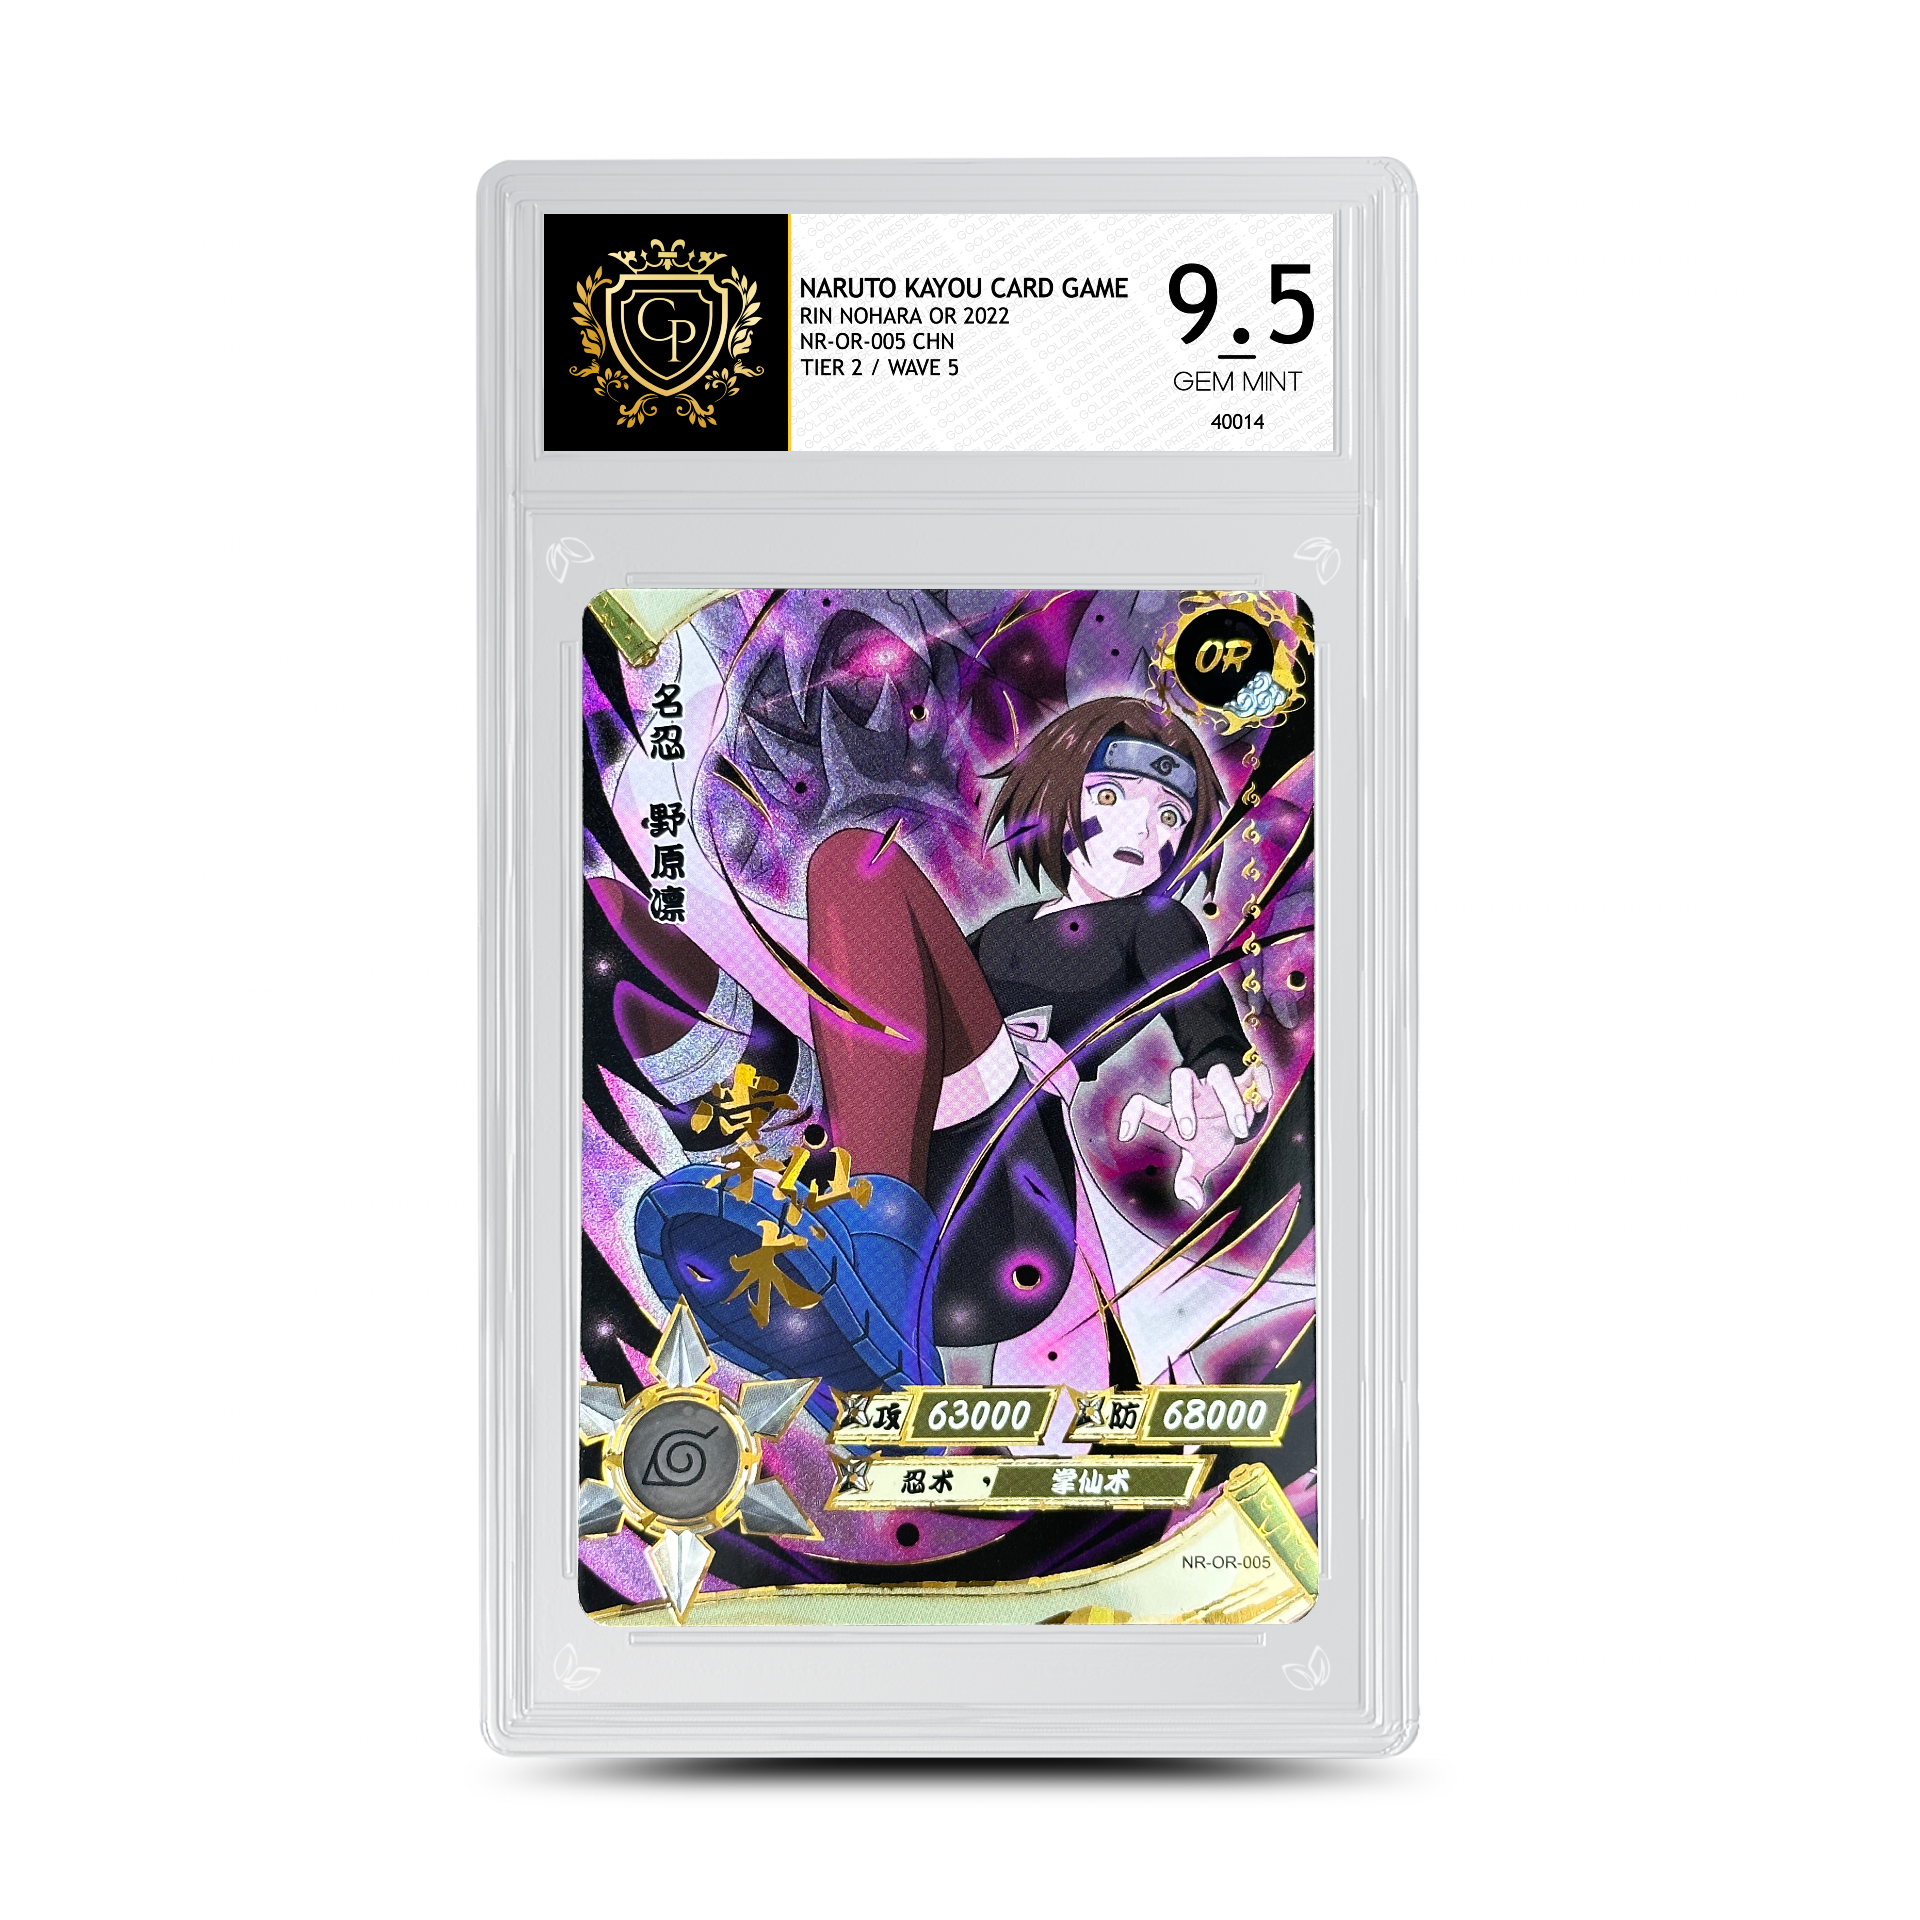 Naruto Kayou Tier 2 Wave 6 T4W5 NR-MR-062 Rin Nohara Holo Foil Texture 1